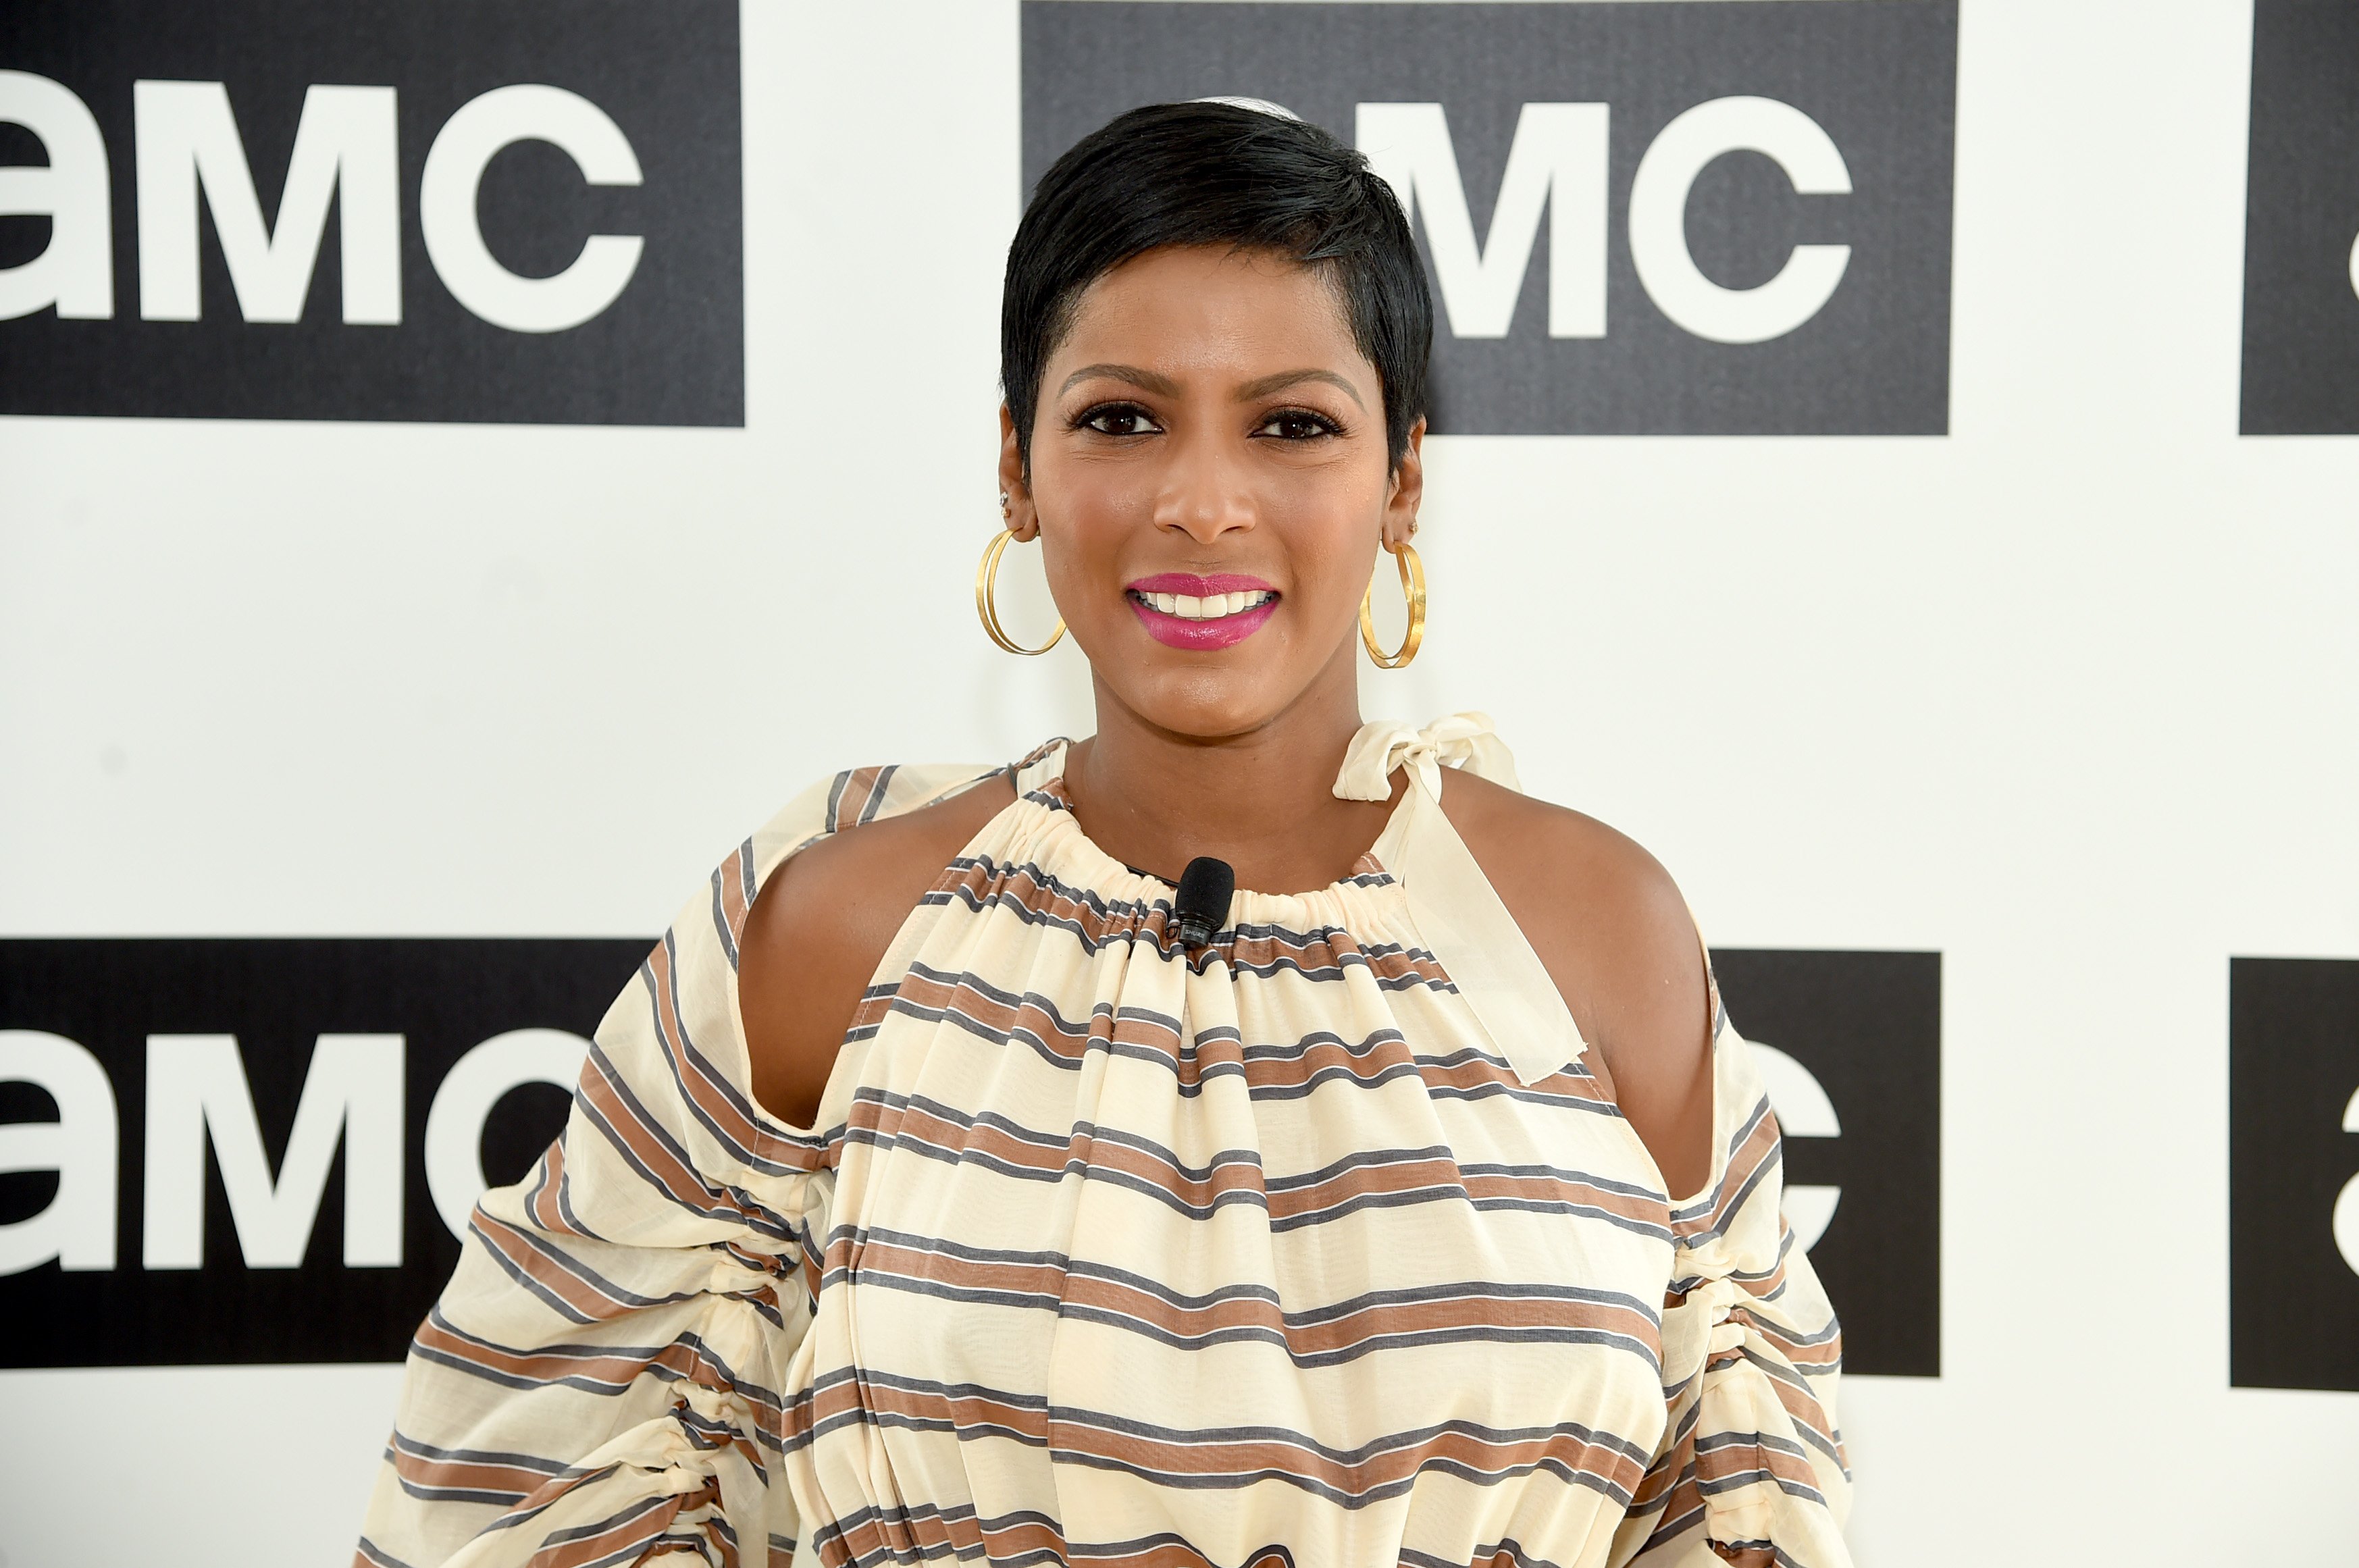 Tamron Hall attends the AMC Summit at Public Hotel on June 20, 2018 in New York City. | Photo: GettyImages